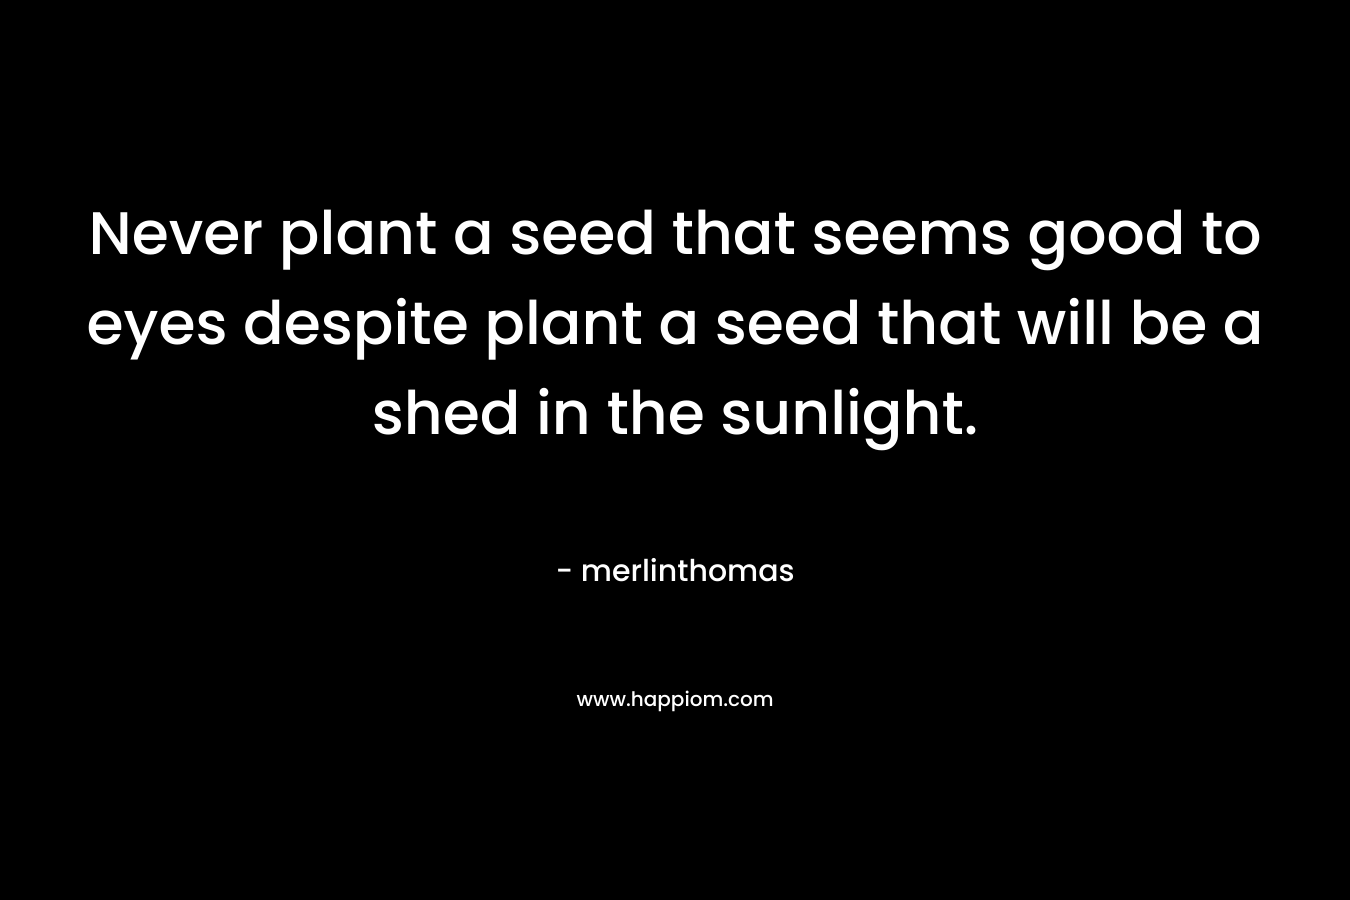 Never plant a seed that seems good to eyes despite plant a seed that will be a shed in the sunlight. – merlinthomas